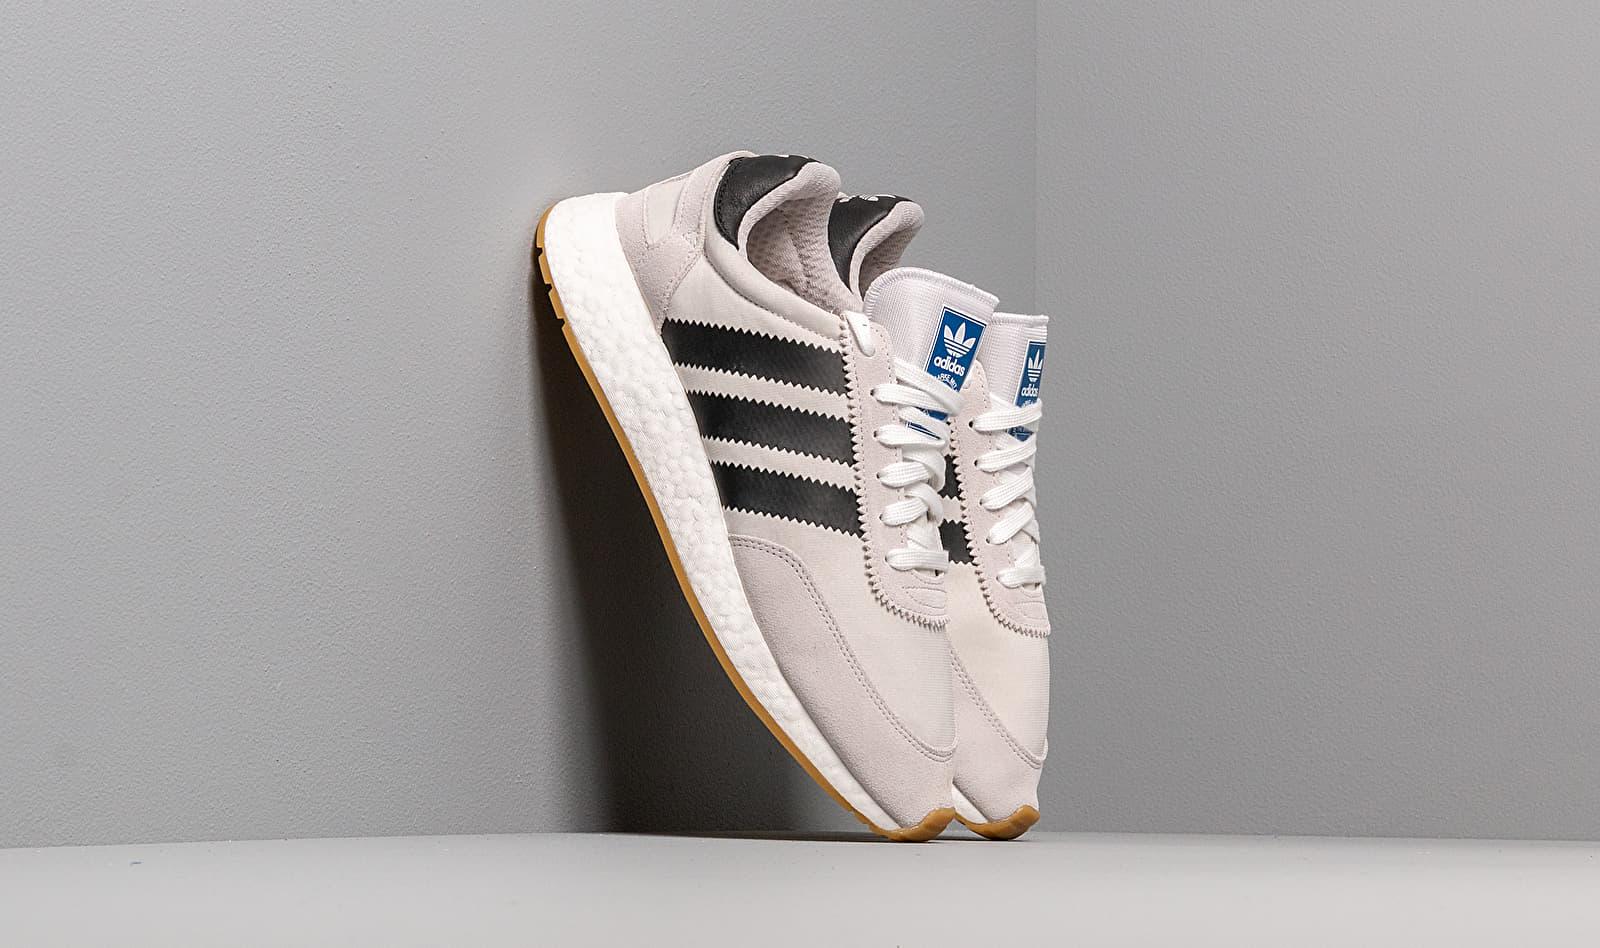 adidas Originals Adidas I-5923 Grey One/ Core Black/ Ftw White in Gray for  Men - Lyst